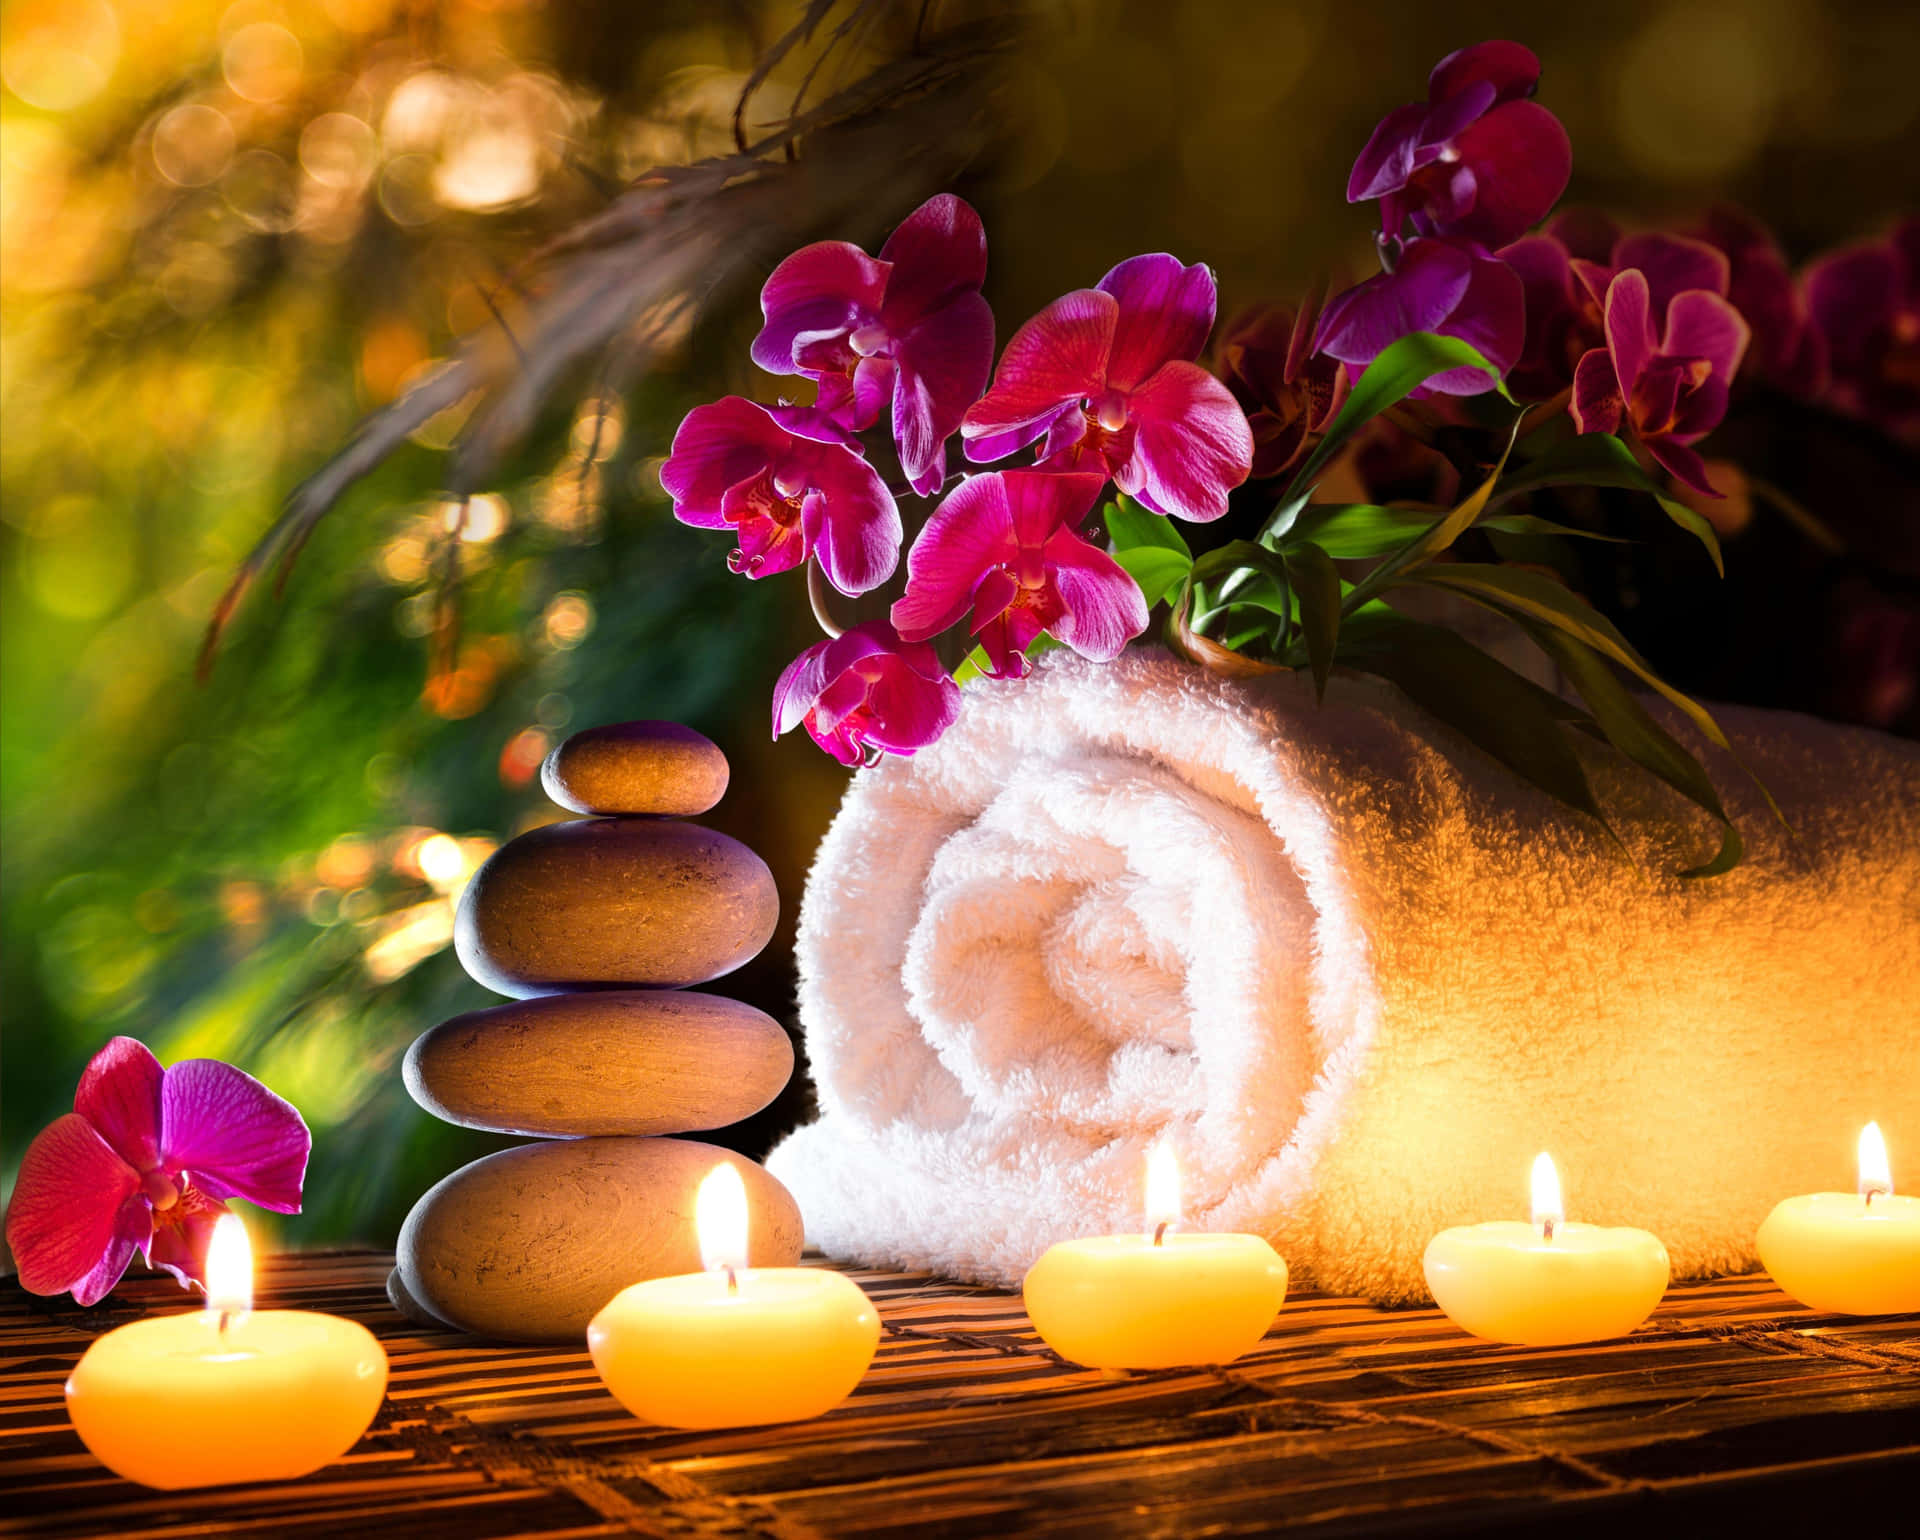 Tranquil Spa Settingwith Candlesand Orchids Wallpaper